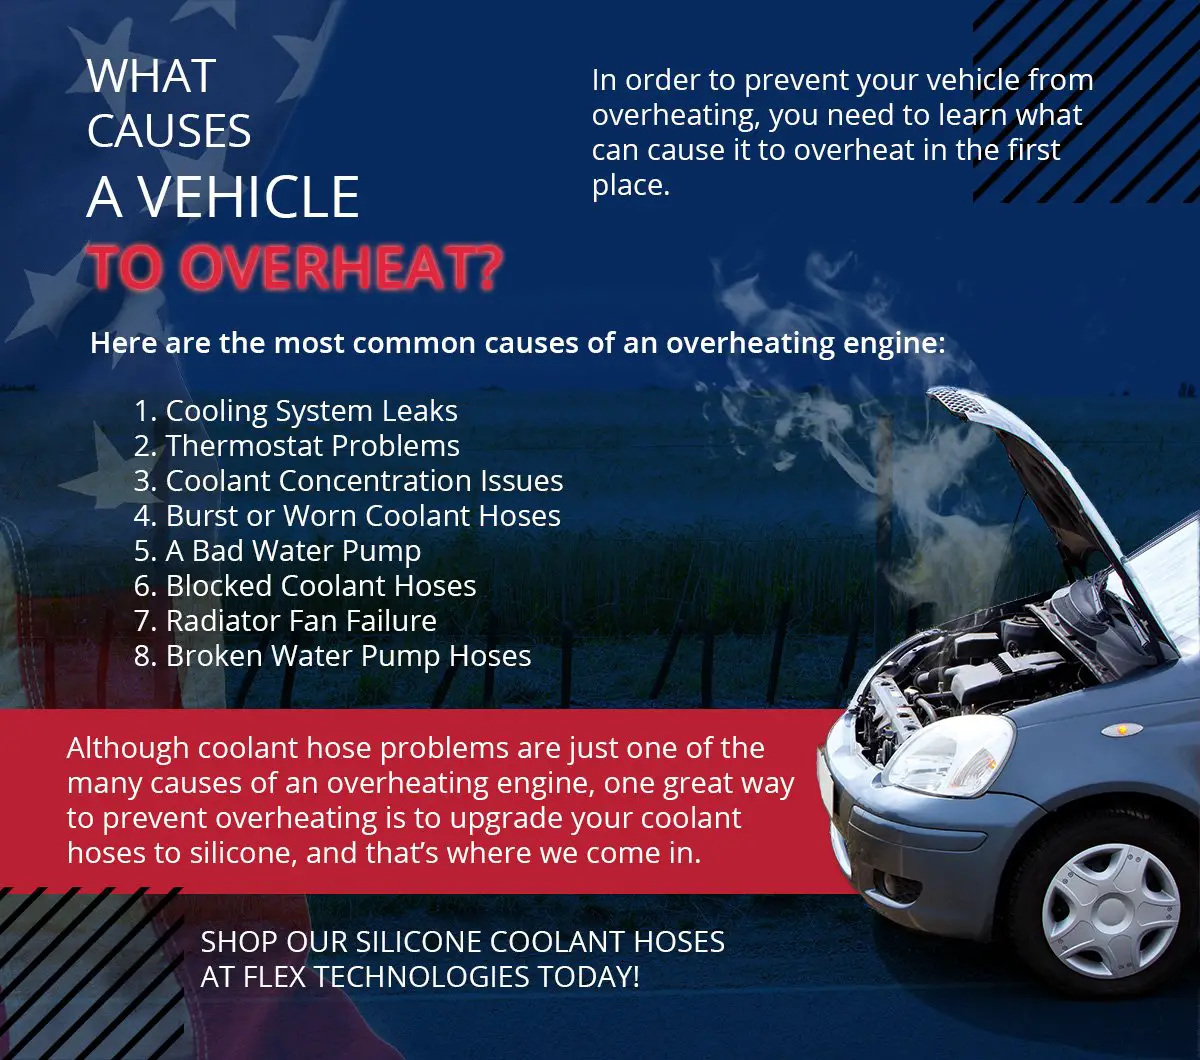 What Causes a Vehicle to Overheat?